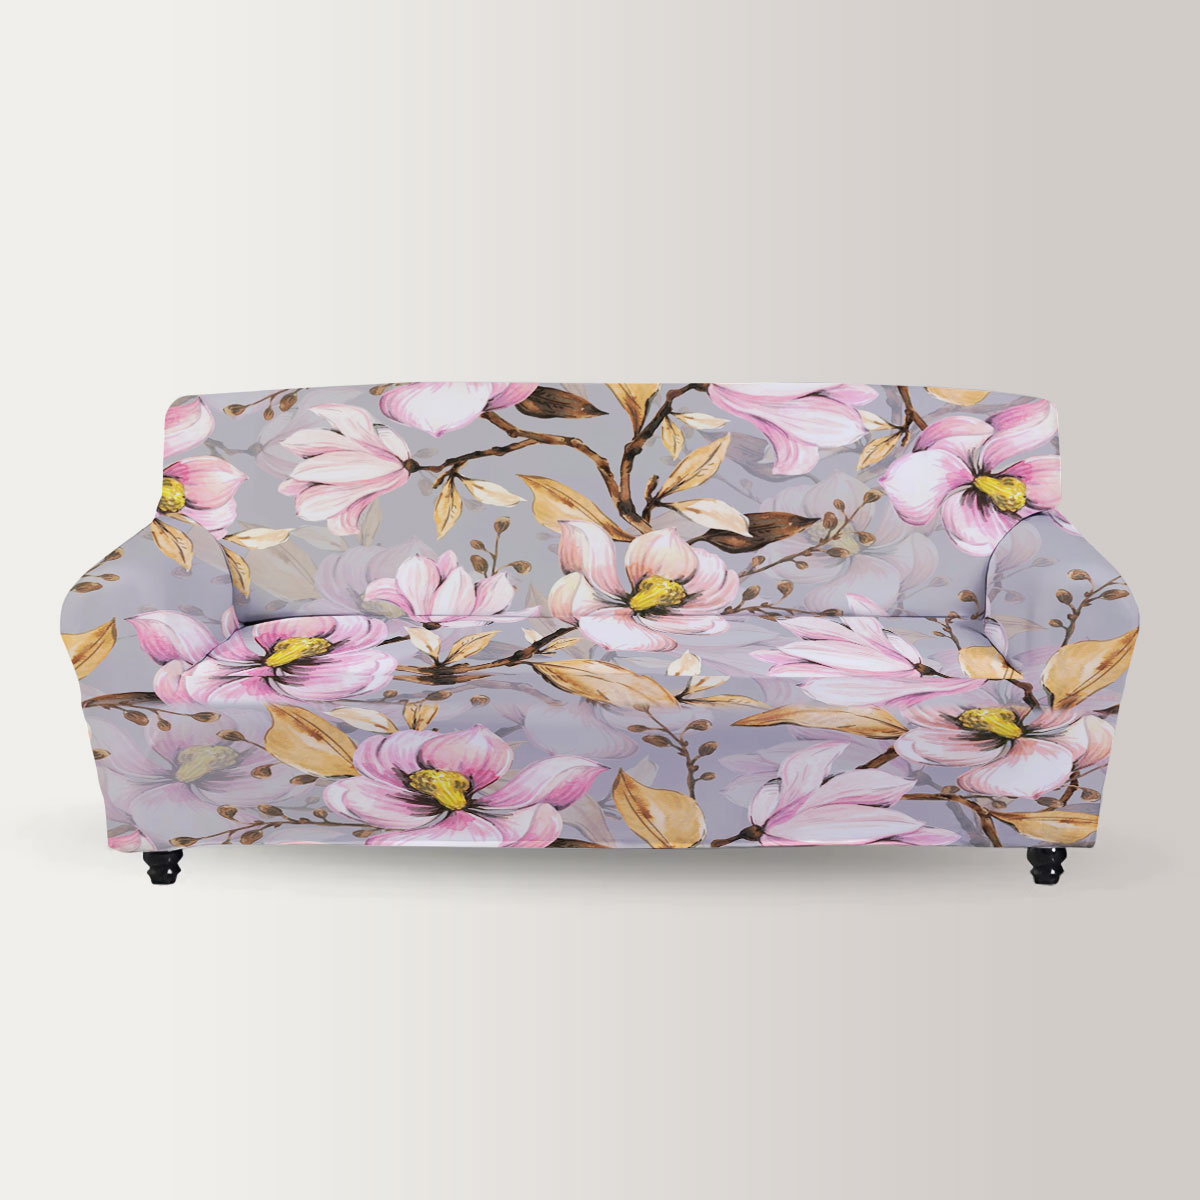 Abstract Magnolia Flowers Sofa Cover